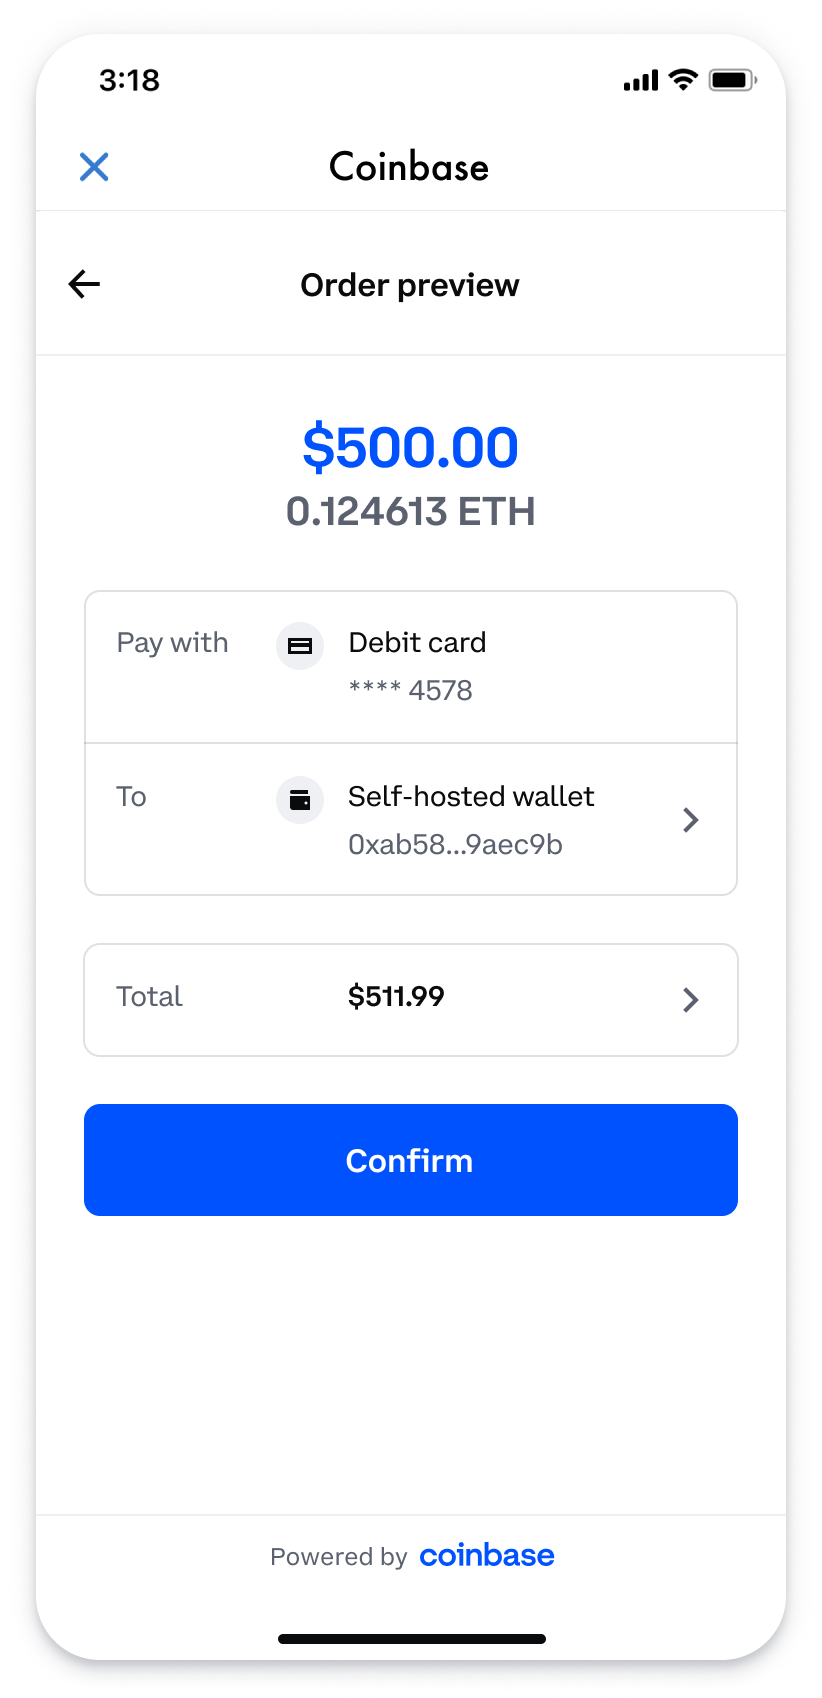 Preview an order from the debit card stored in your Coinbase account to your self-hosted wallet.